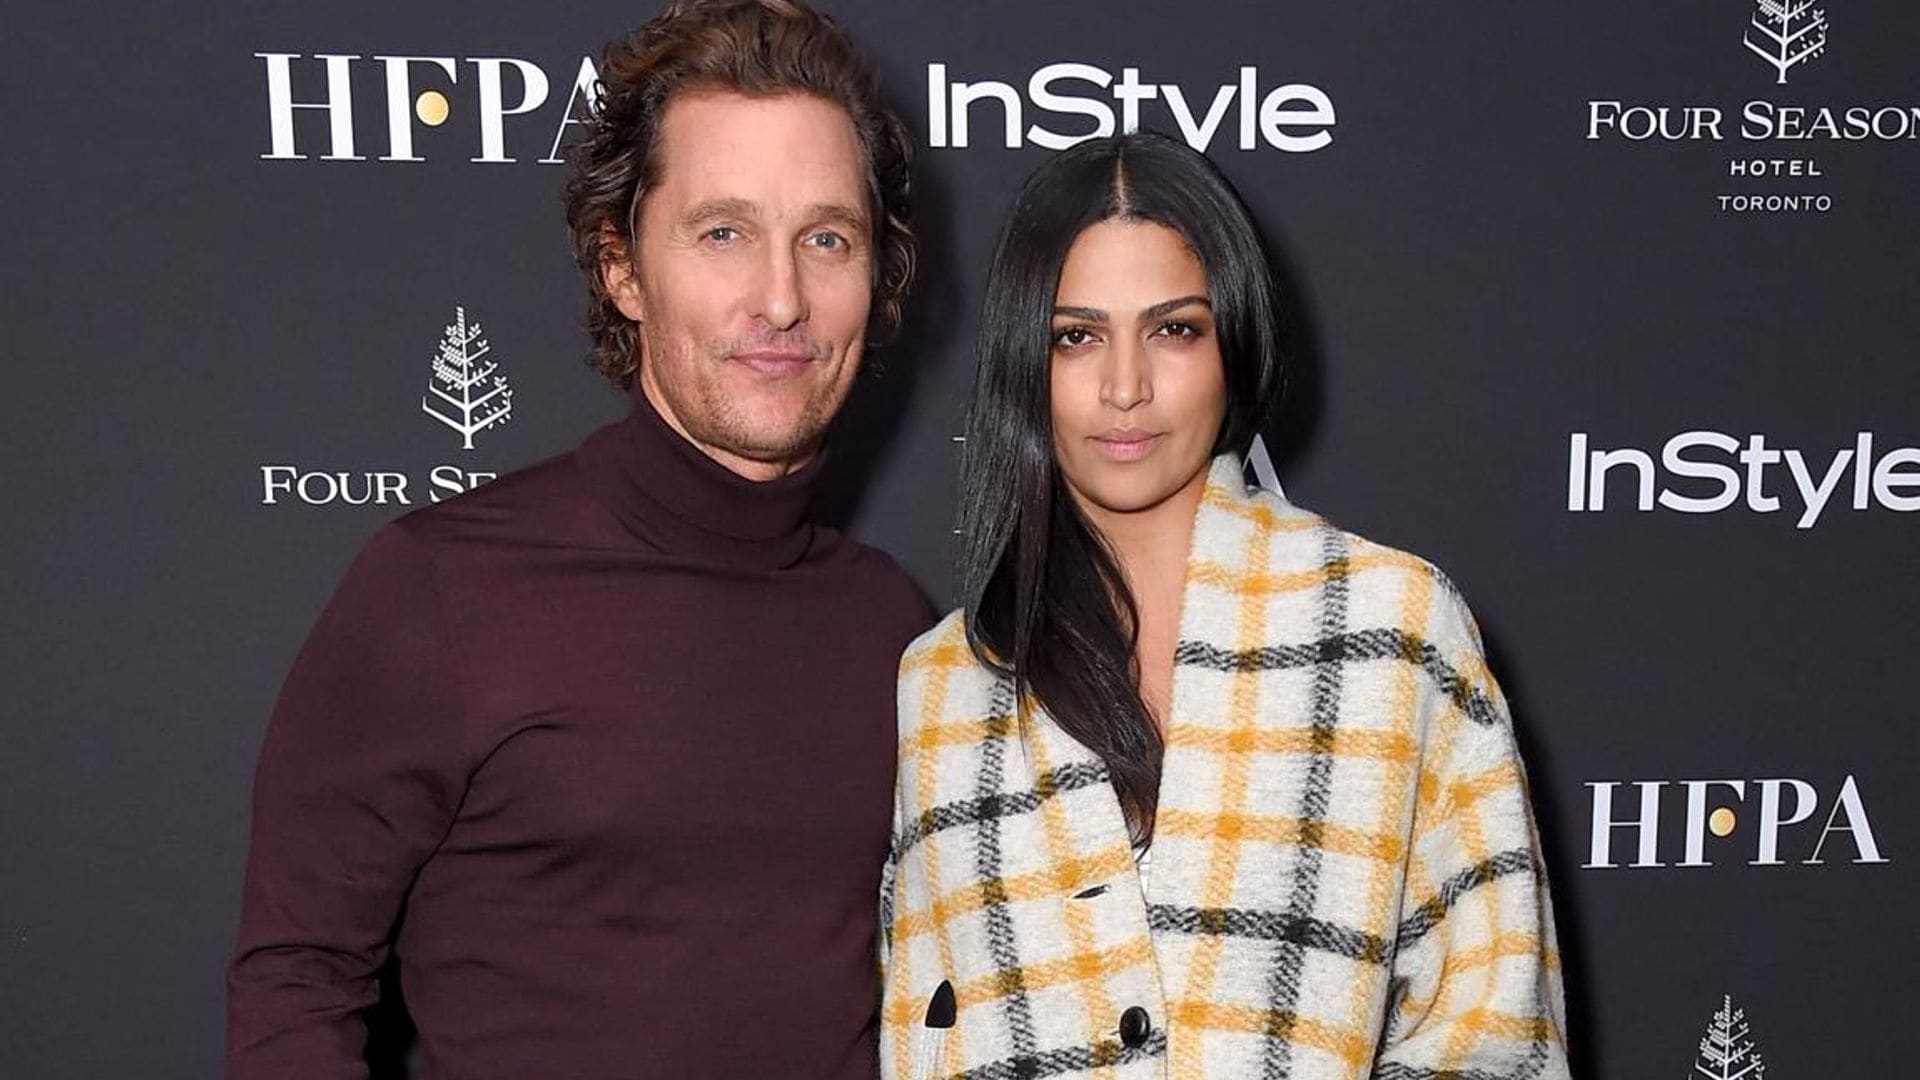 Matthew McConaughey and Camila Alves suit up while in London